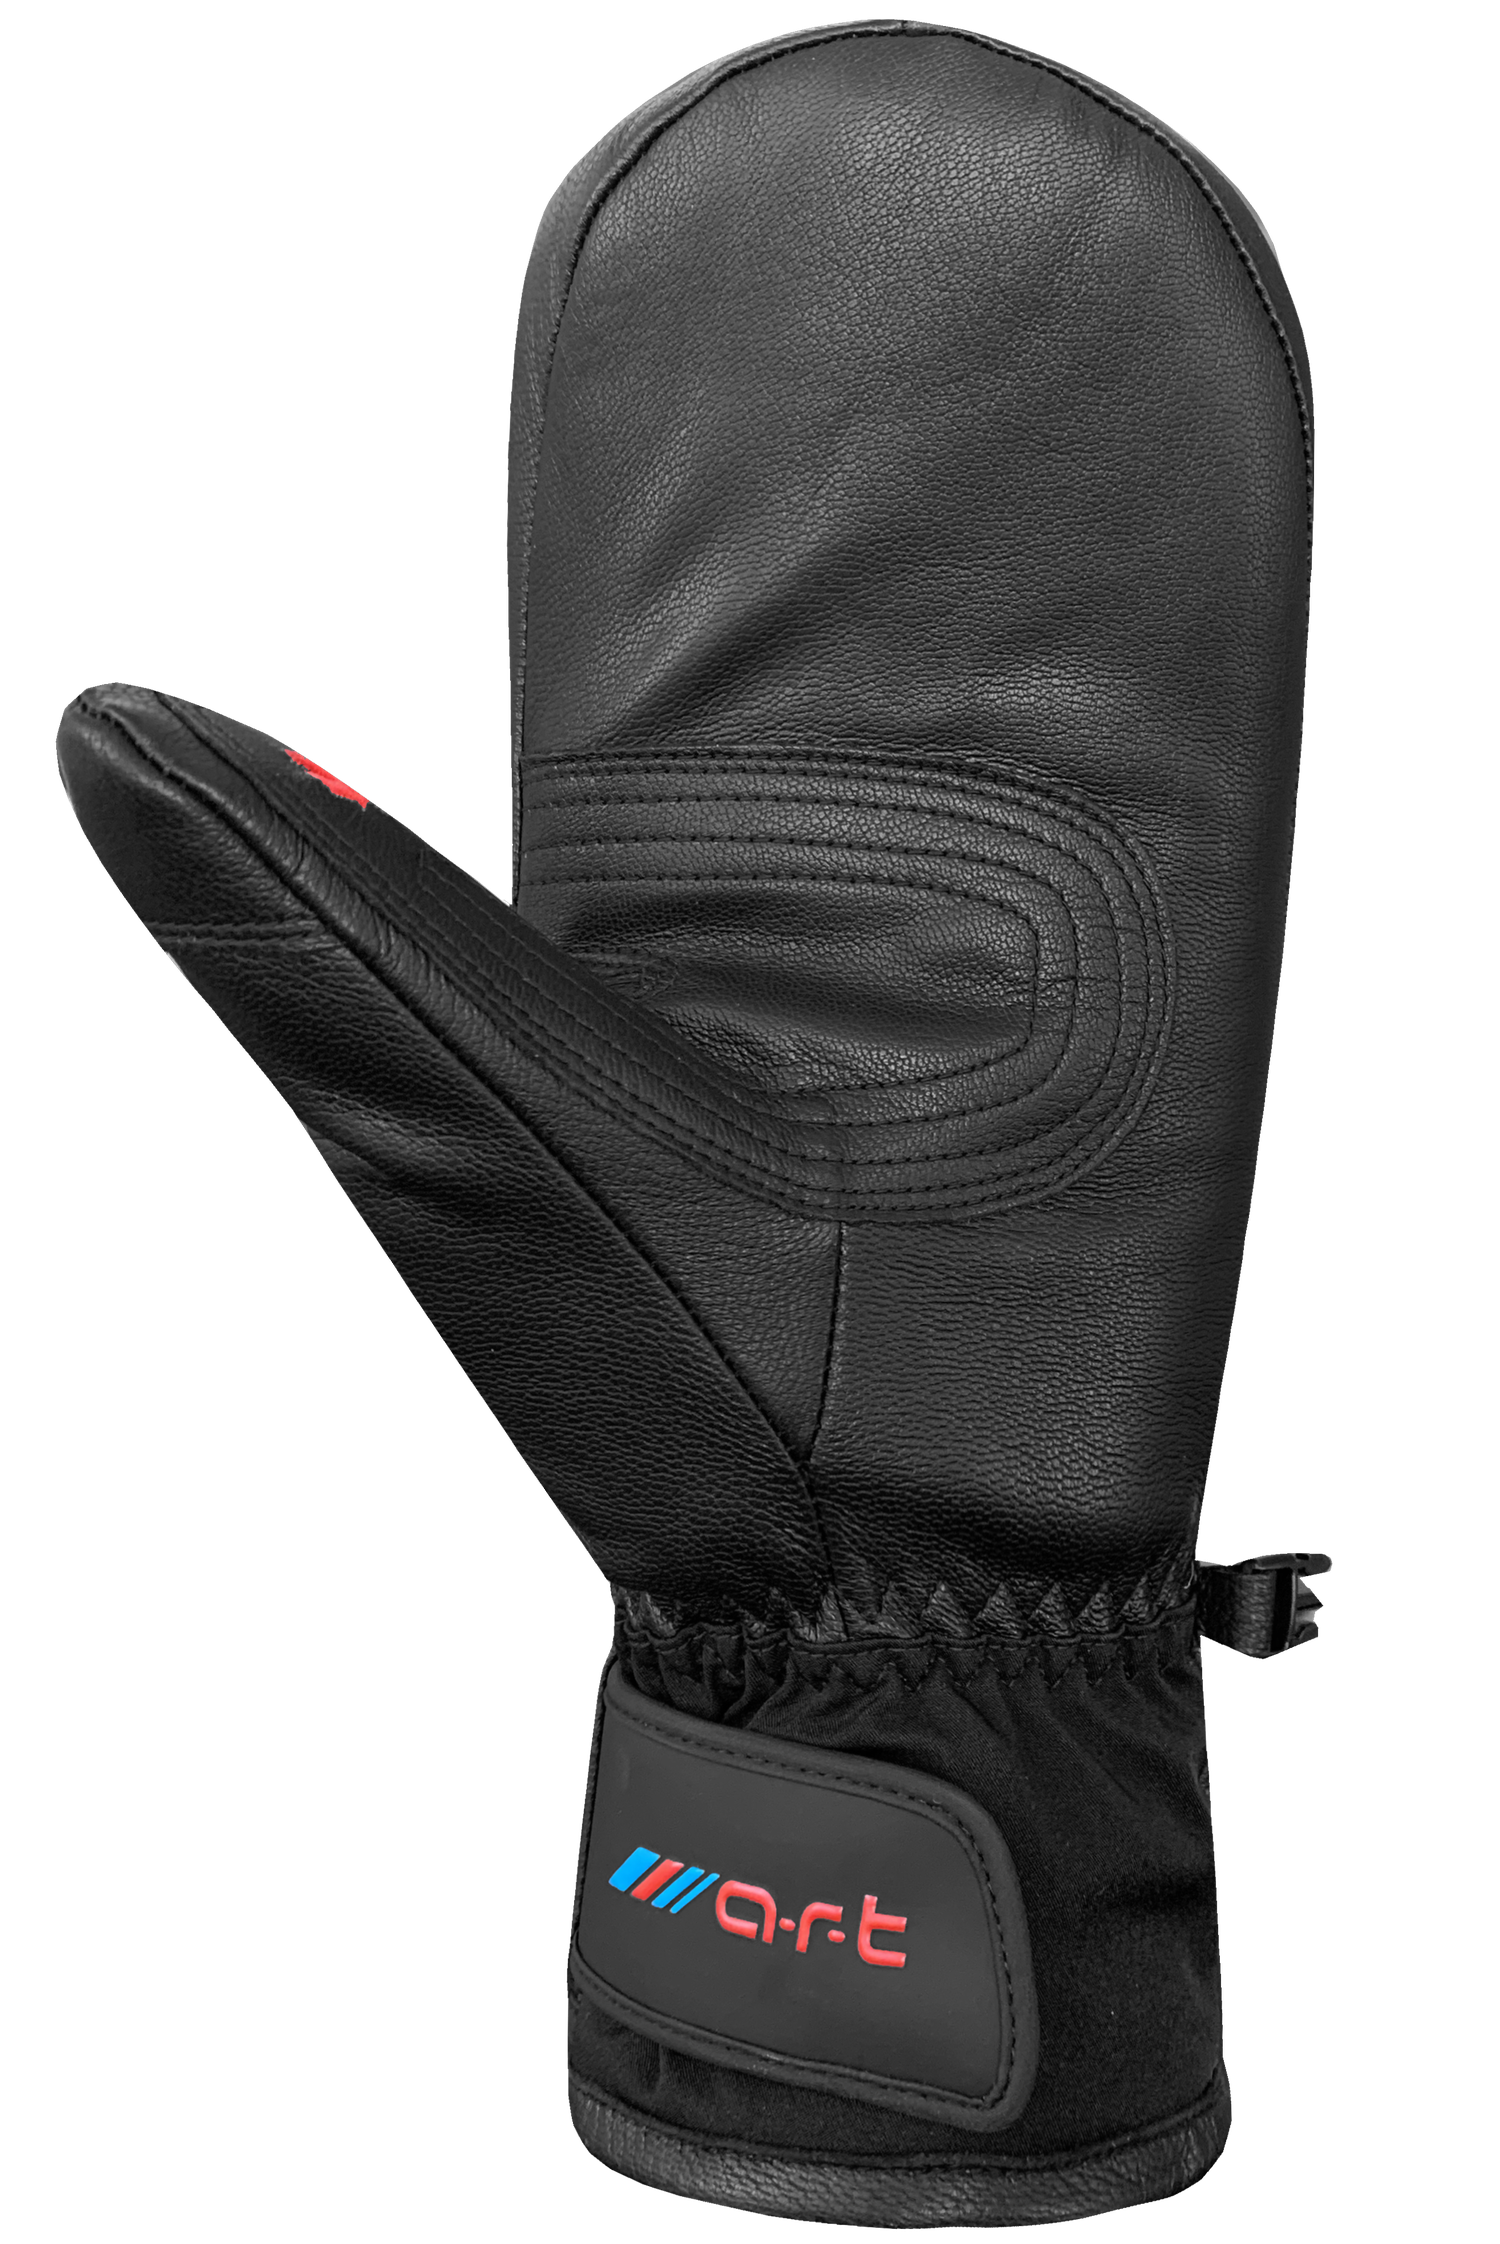 Son of T 4 Mitts - Adult, Black/Black